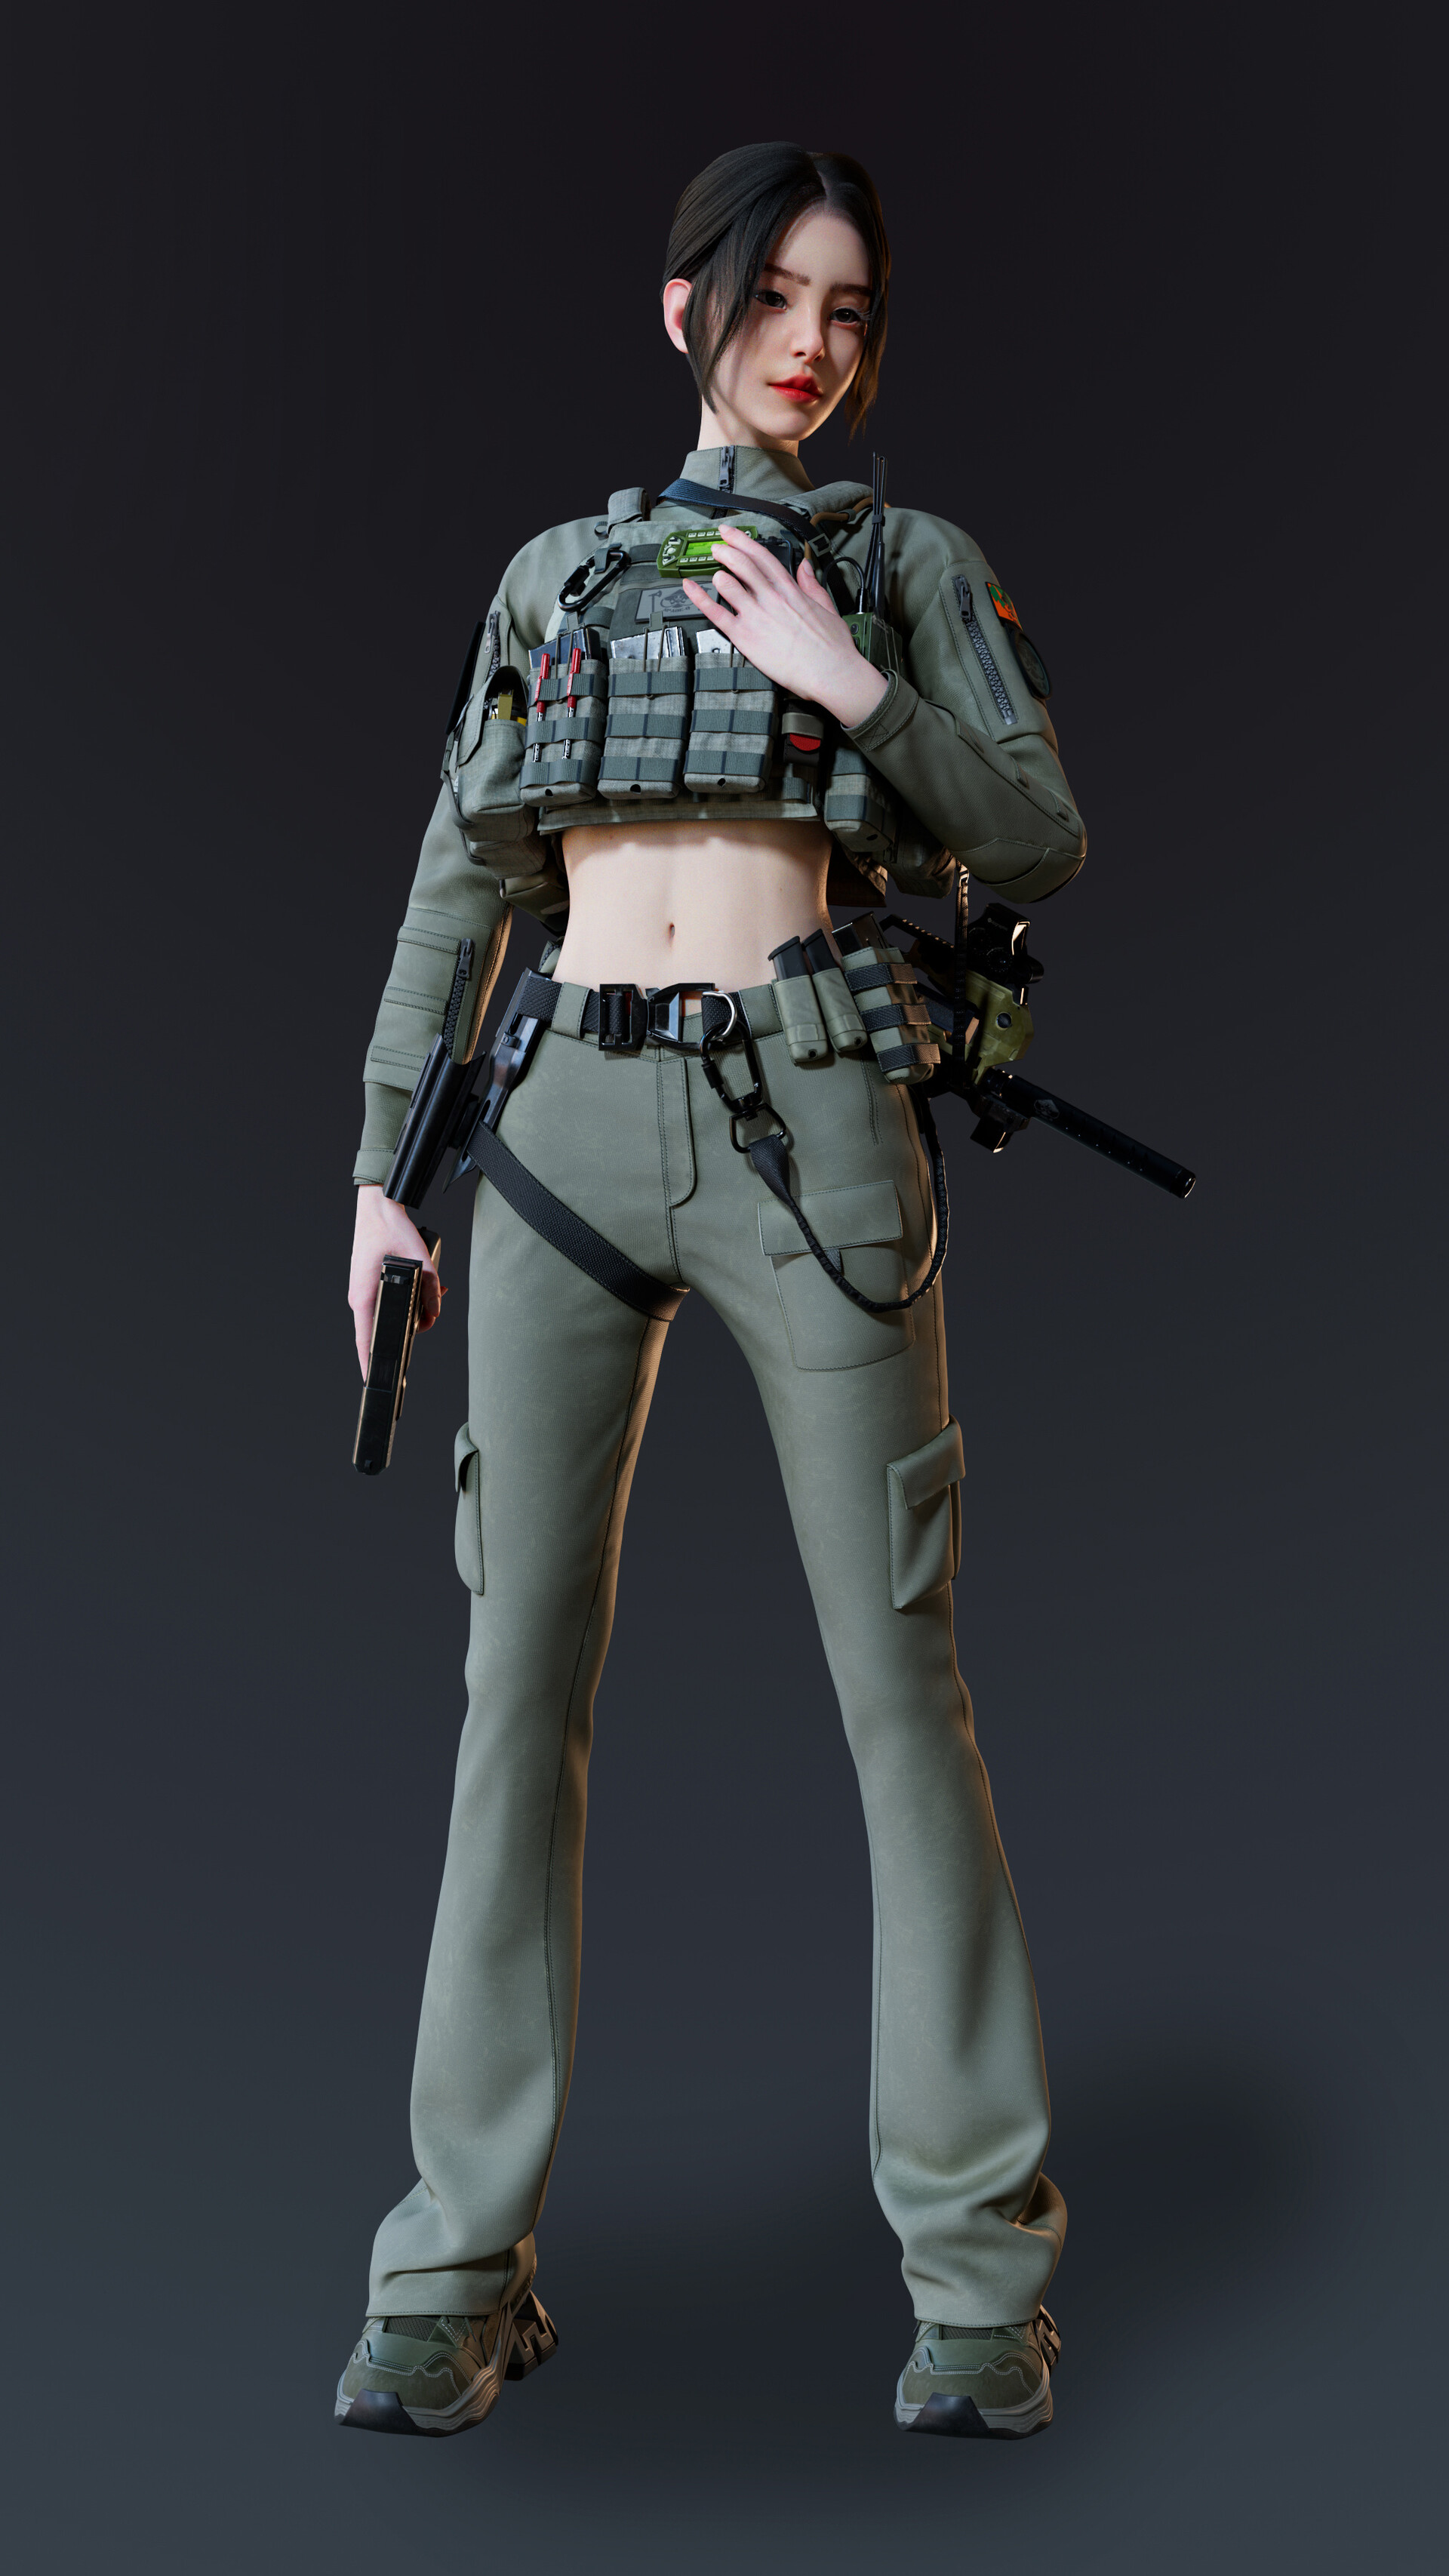 Tactical Girl by straight8photo on DeviantArt